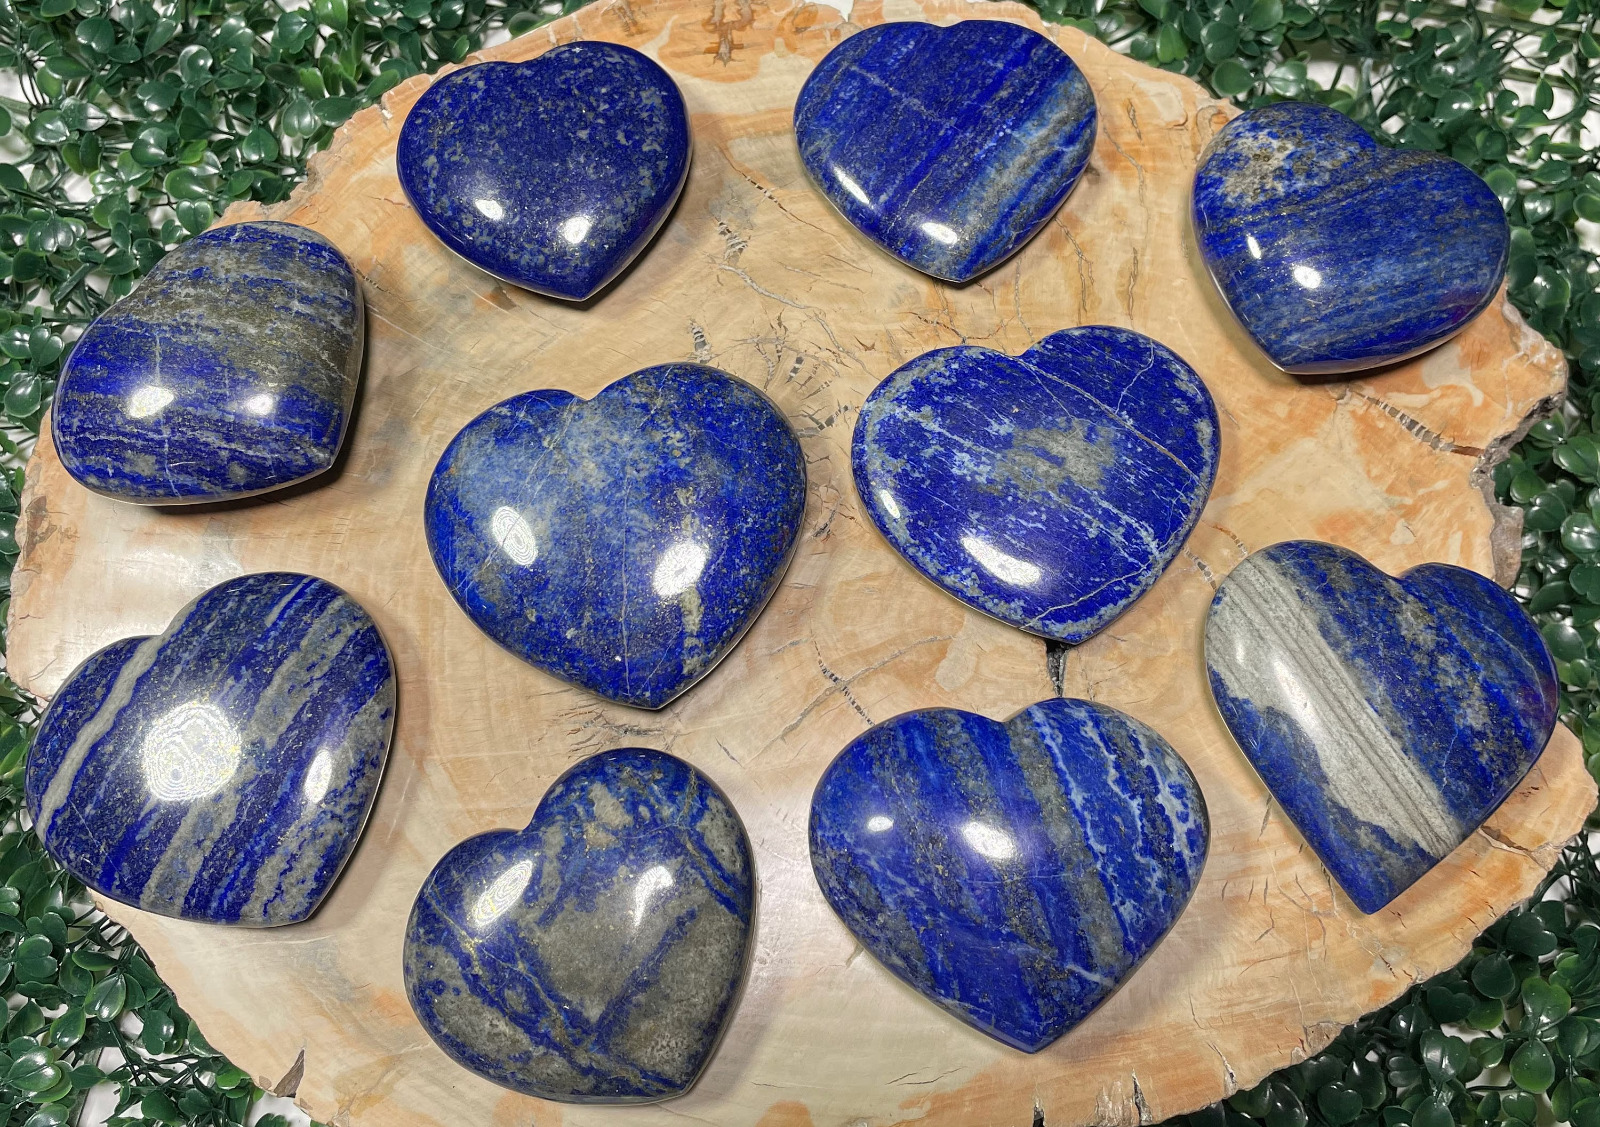 Large Lapis Lazuli Hearts, Natural Lapis from Afghanistan 151g to 283g WE PICK